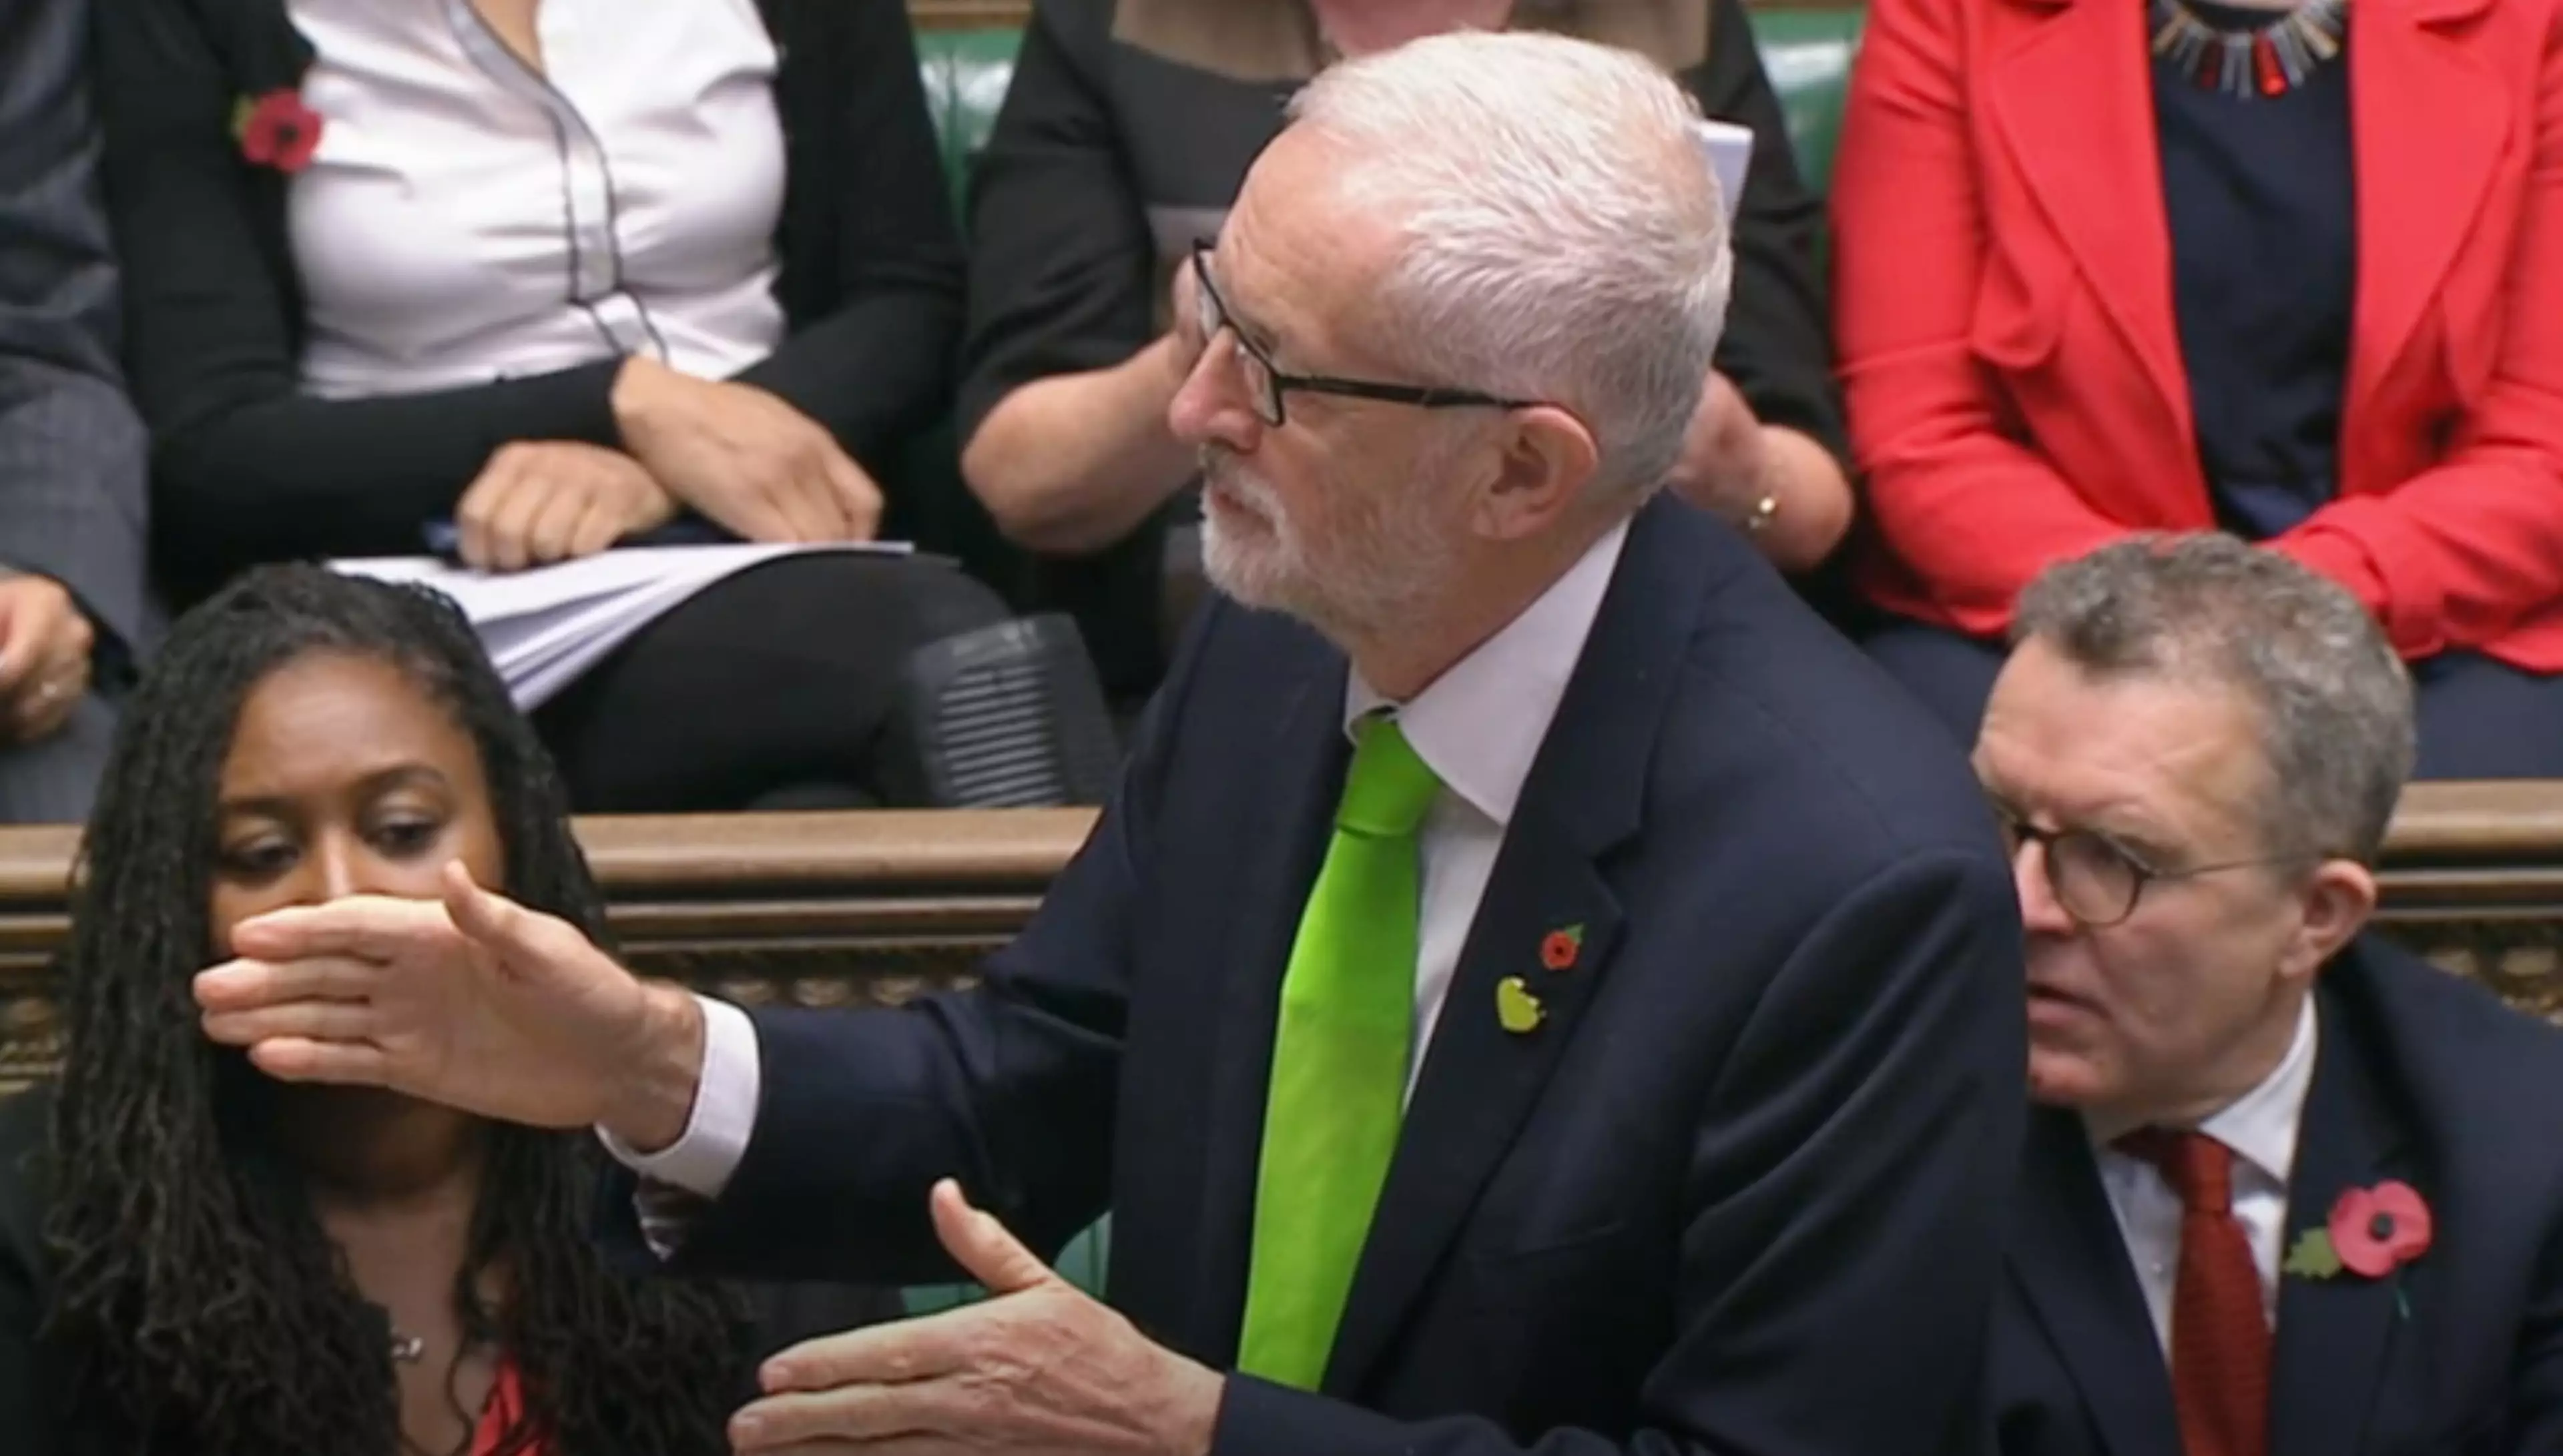 Jeremy Corbyn wore a green tie to pay tribute to the Grenfell victims during today's PMQs.